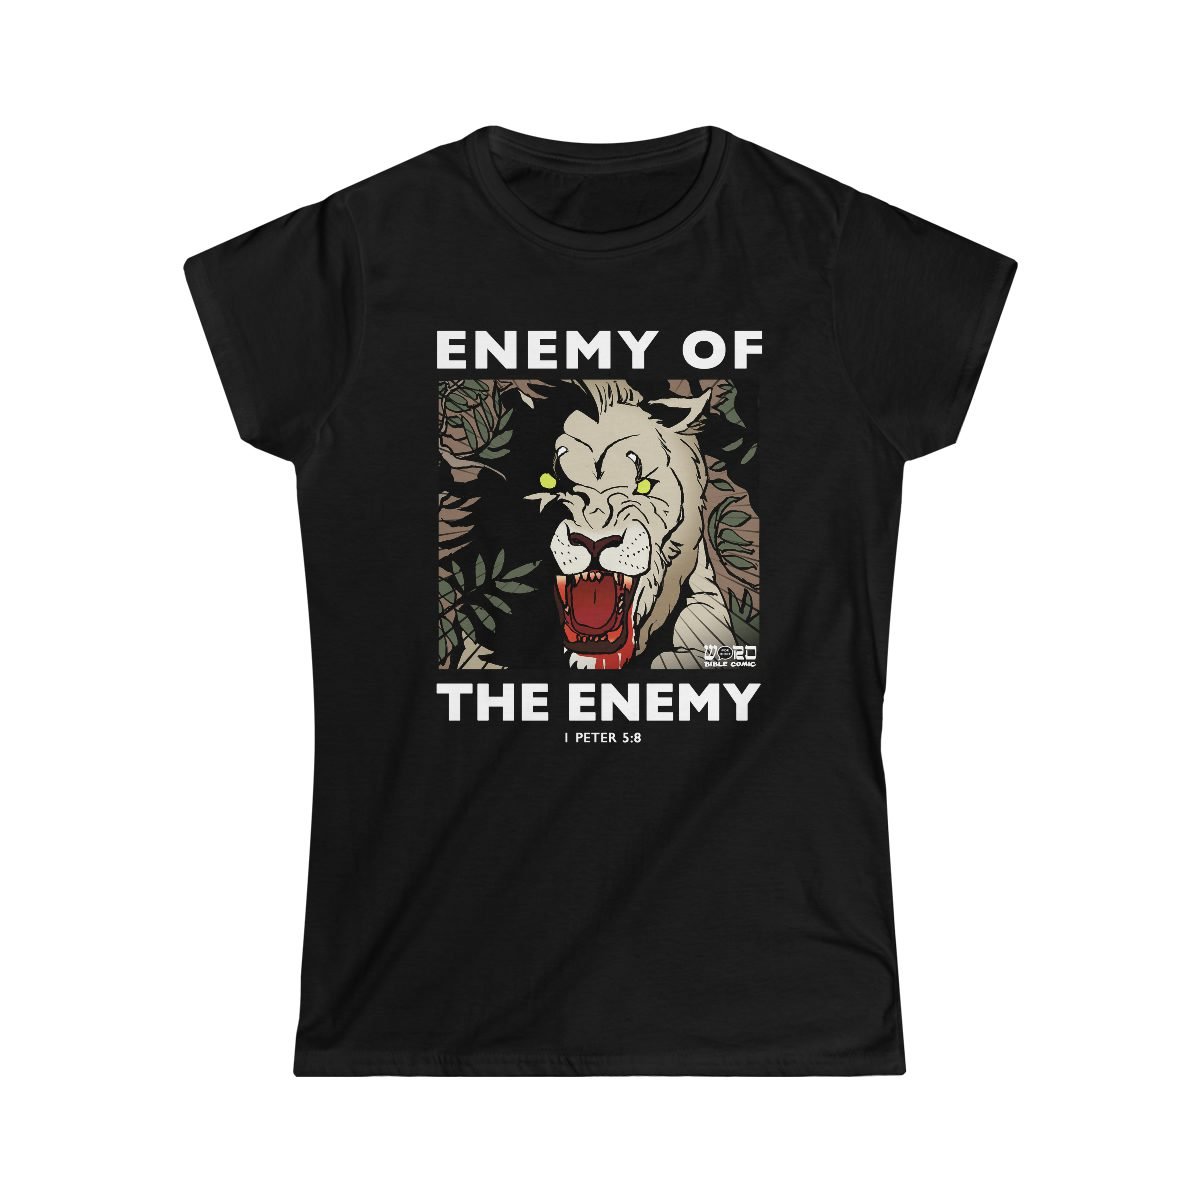 Word For Word Bible Comics – Enemy of the Enemy Women’s Short Sleeve Tshirt 64000L